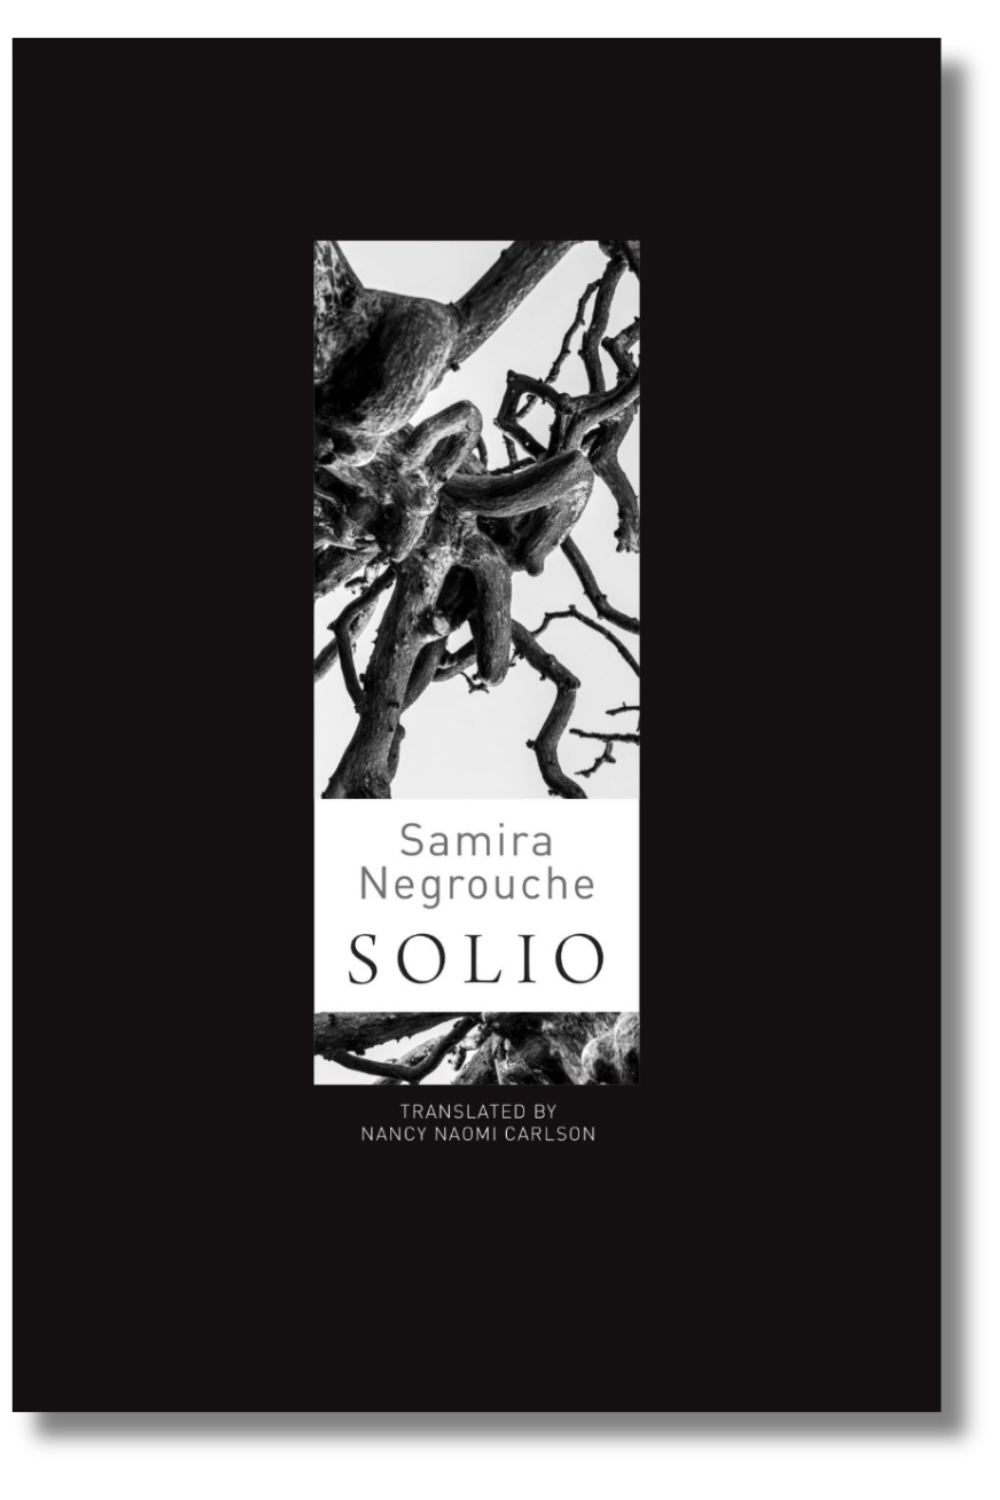 The cover of "Solio" by Samira Negrouche, tr. by Nancy Naomi Carlson